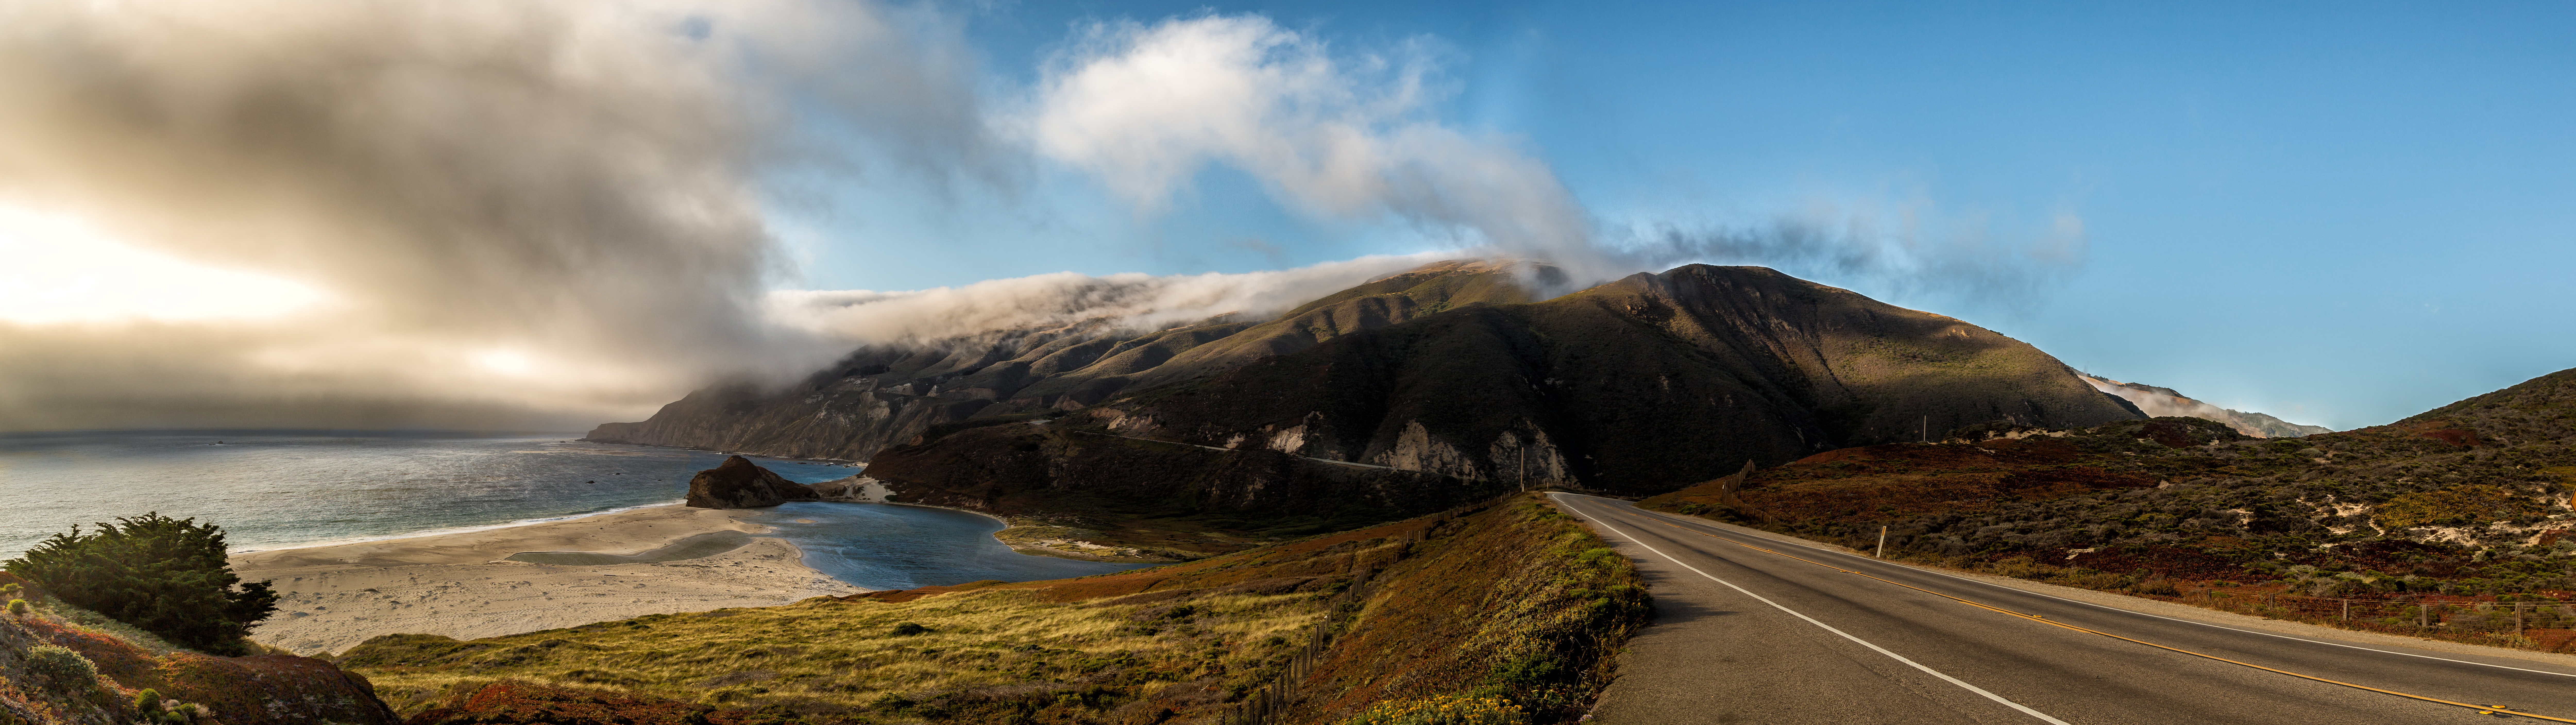 gray concrete road near body of water and mountains, big sur, big sur